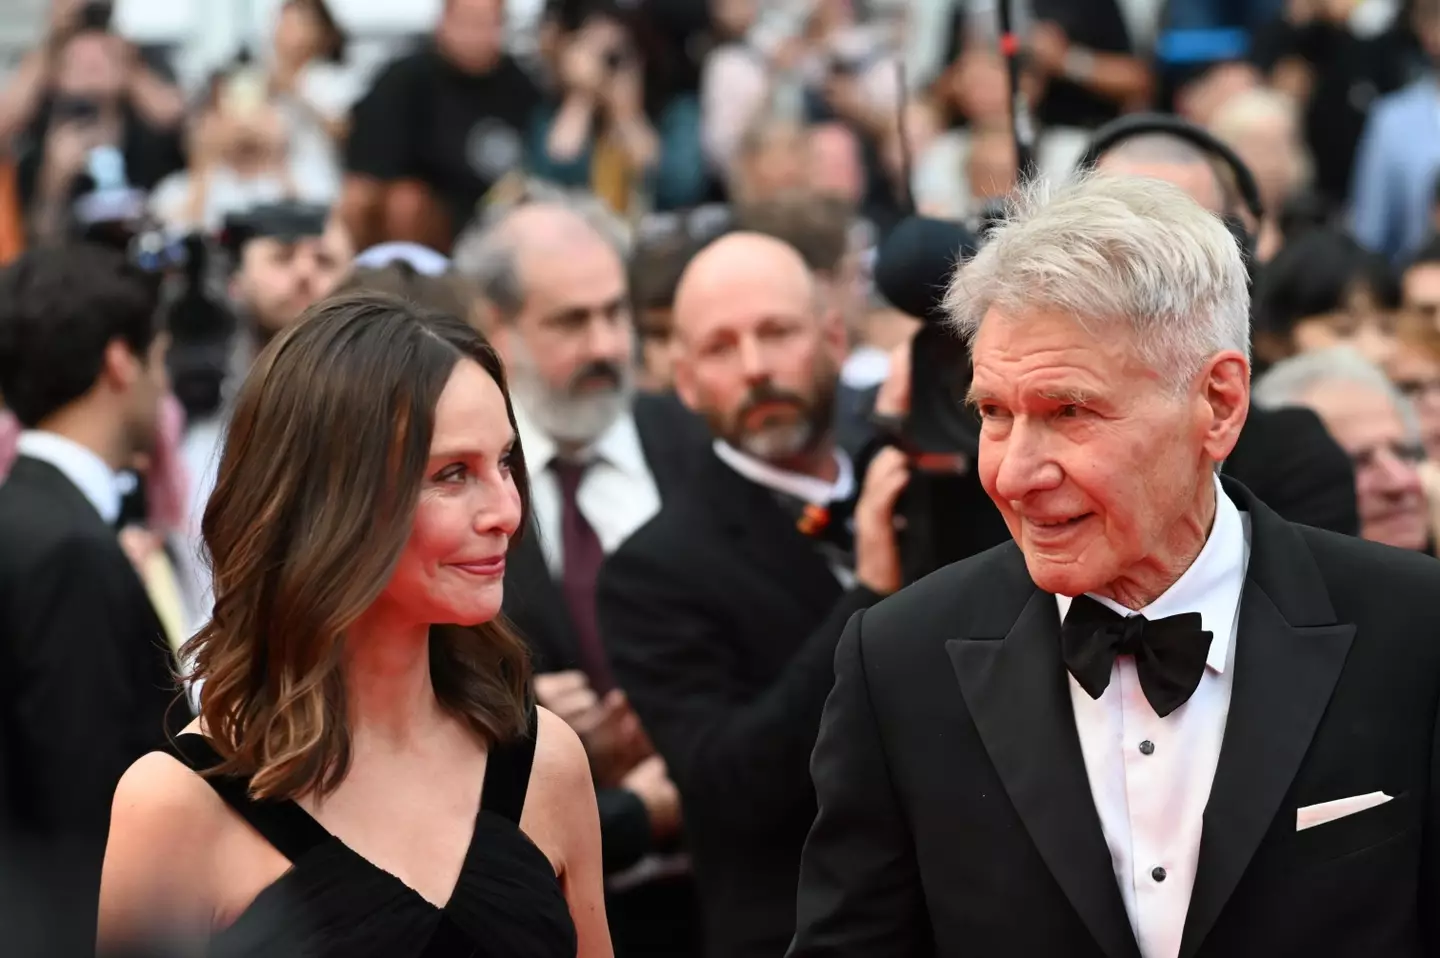 Harrison Ford and Calista Flockhart on the red carpet at Cannes Film Festival.